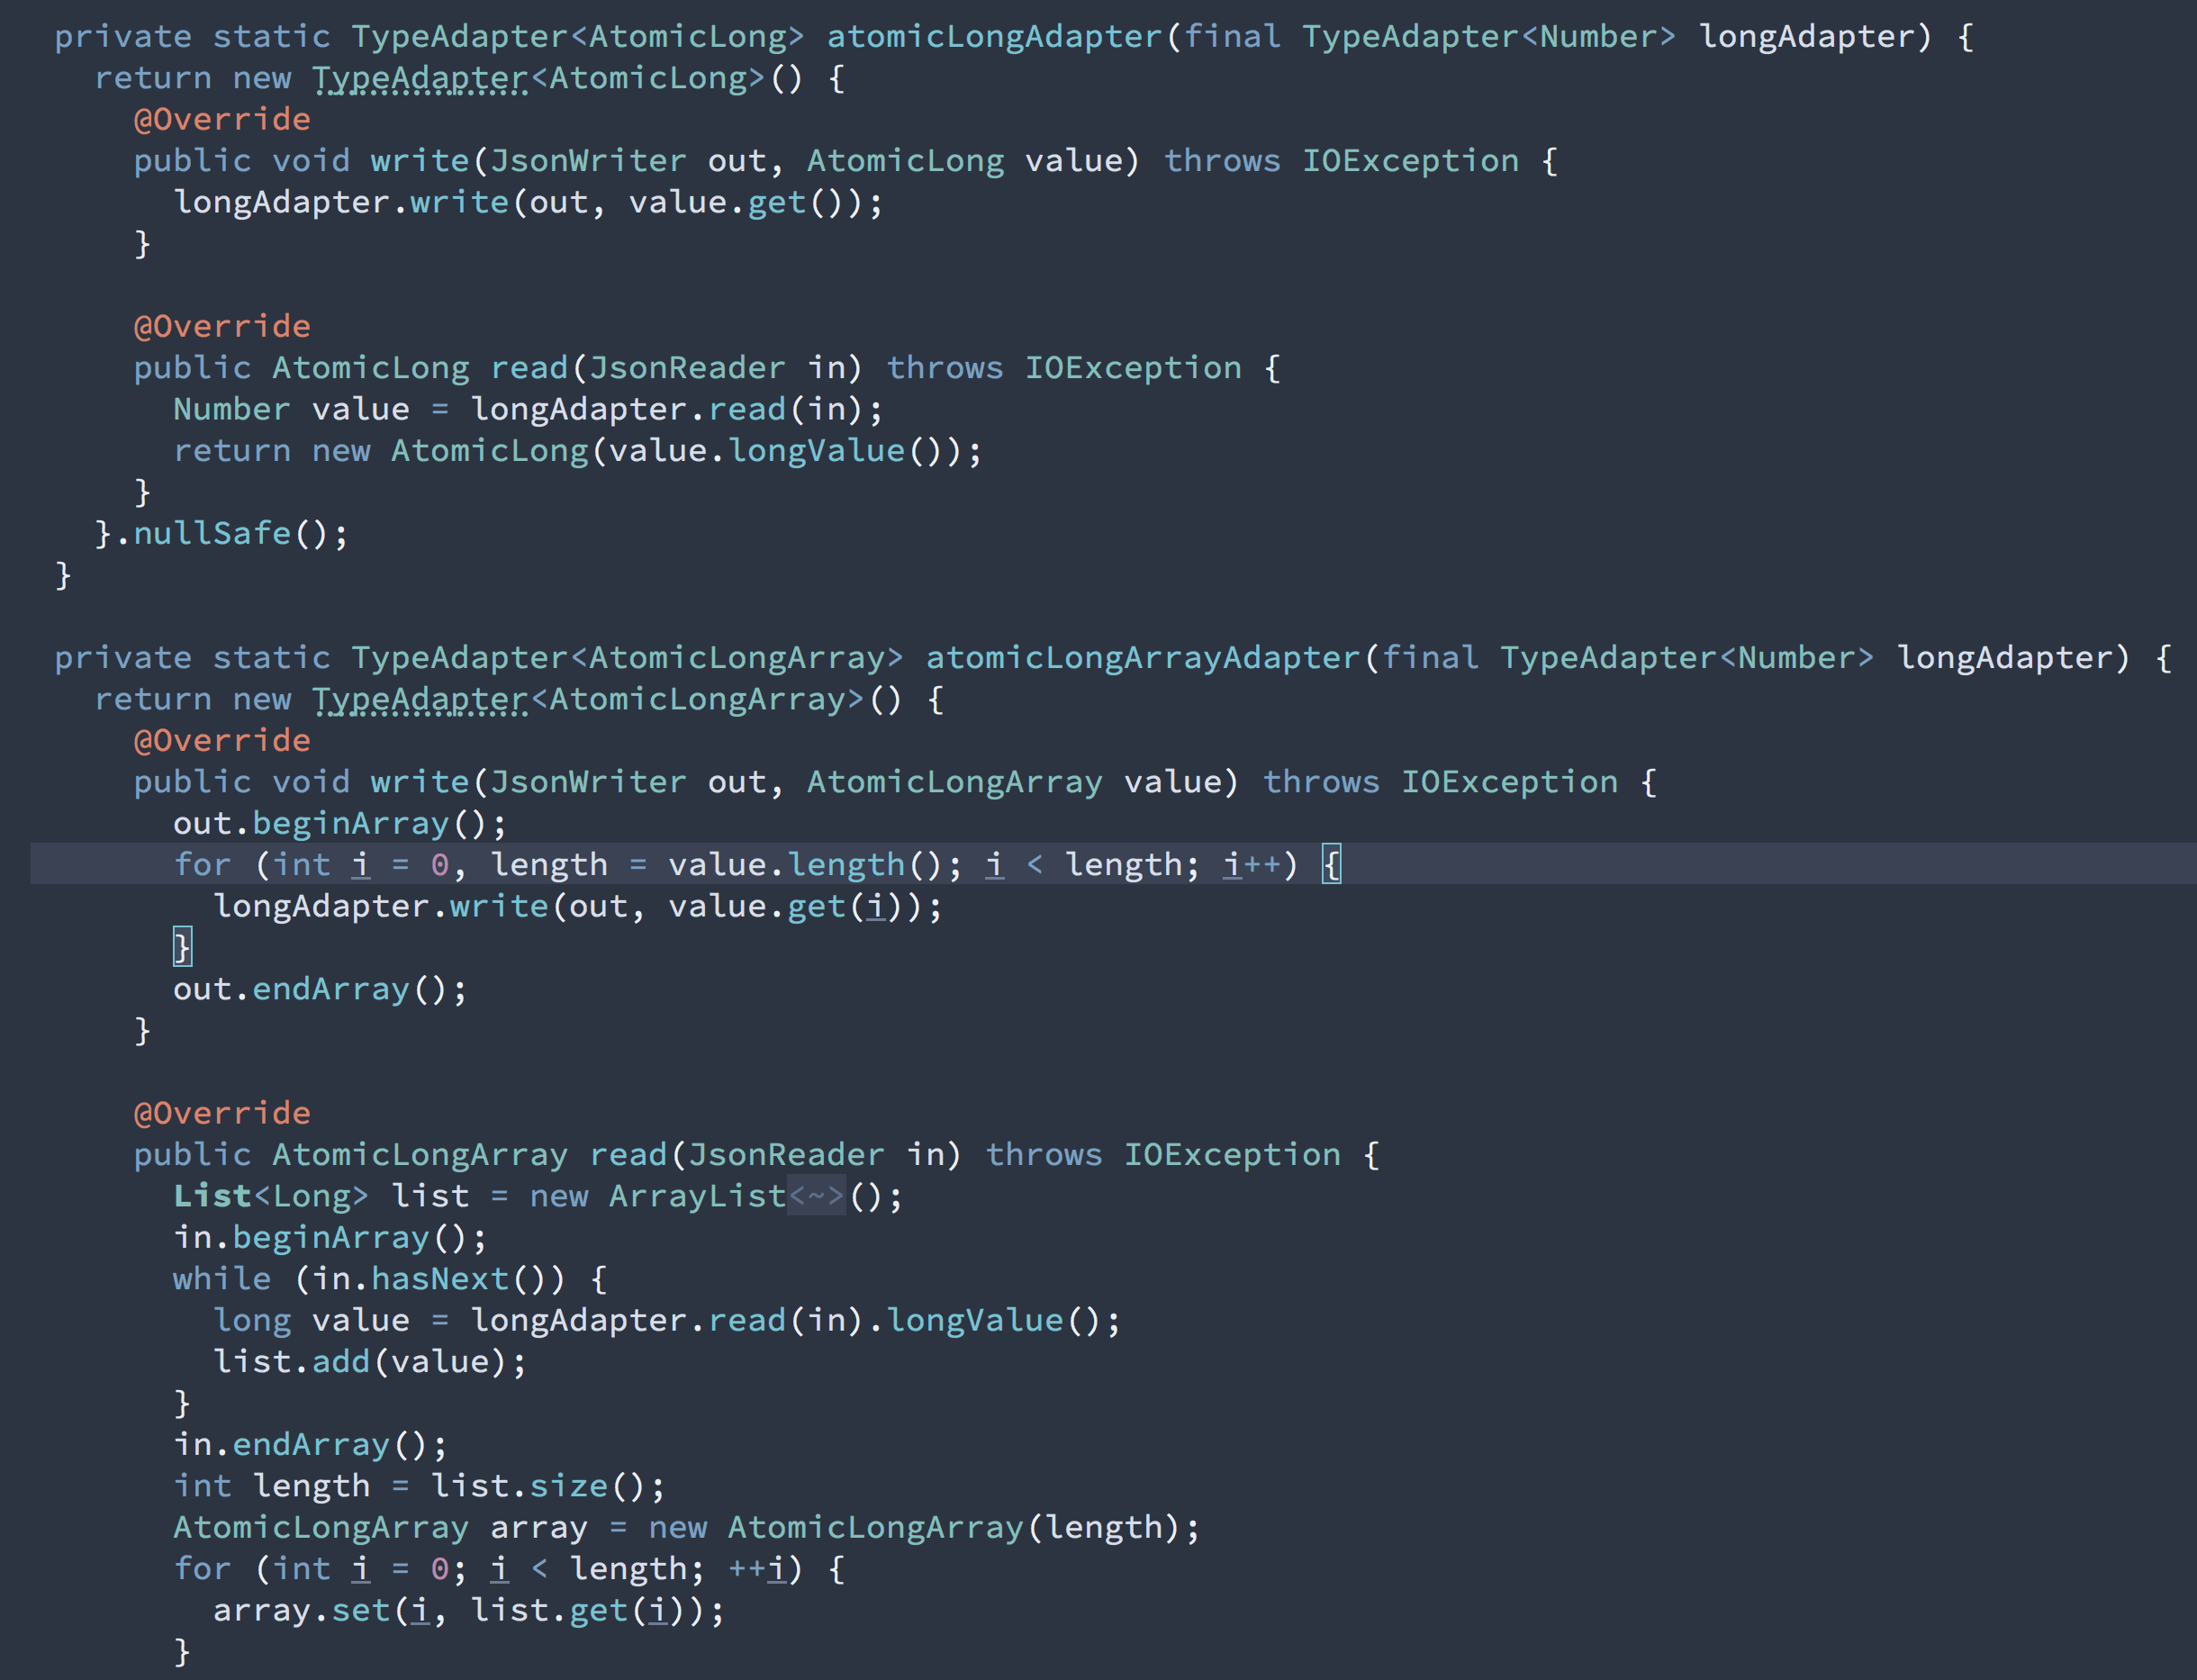 Screenshot showing the IDE code editor with Java methods to process JSON data